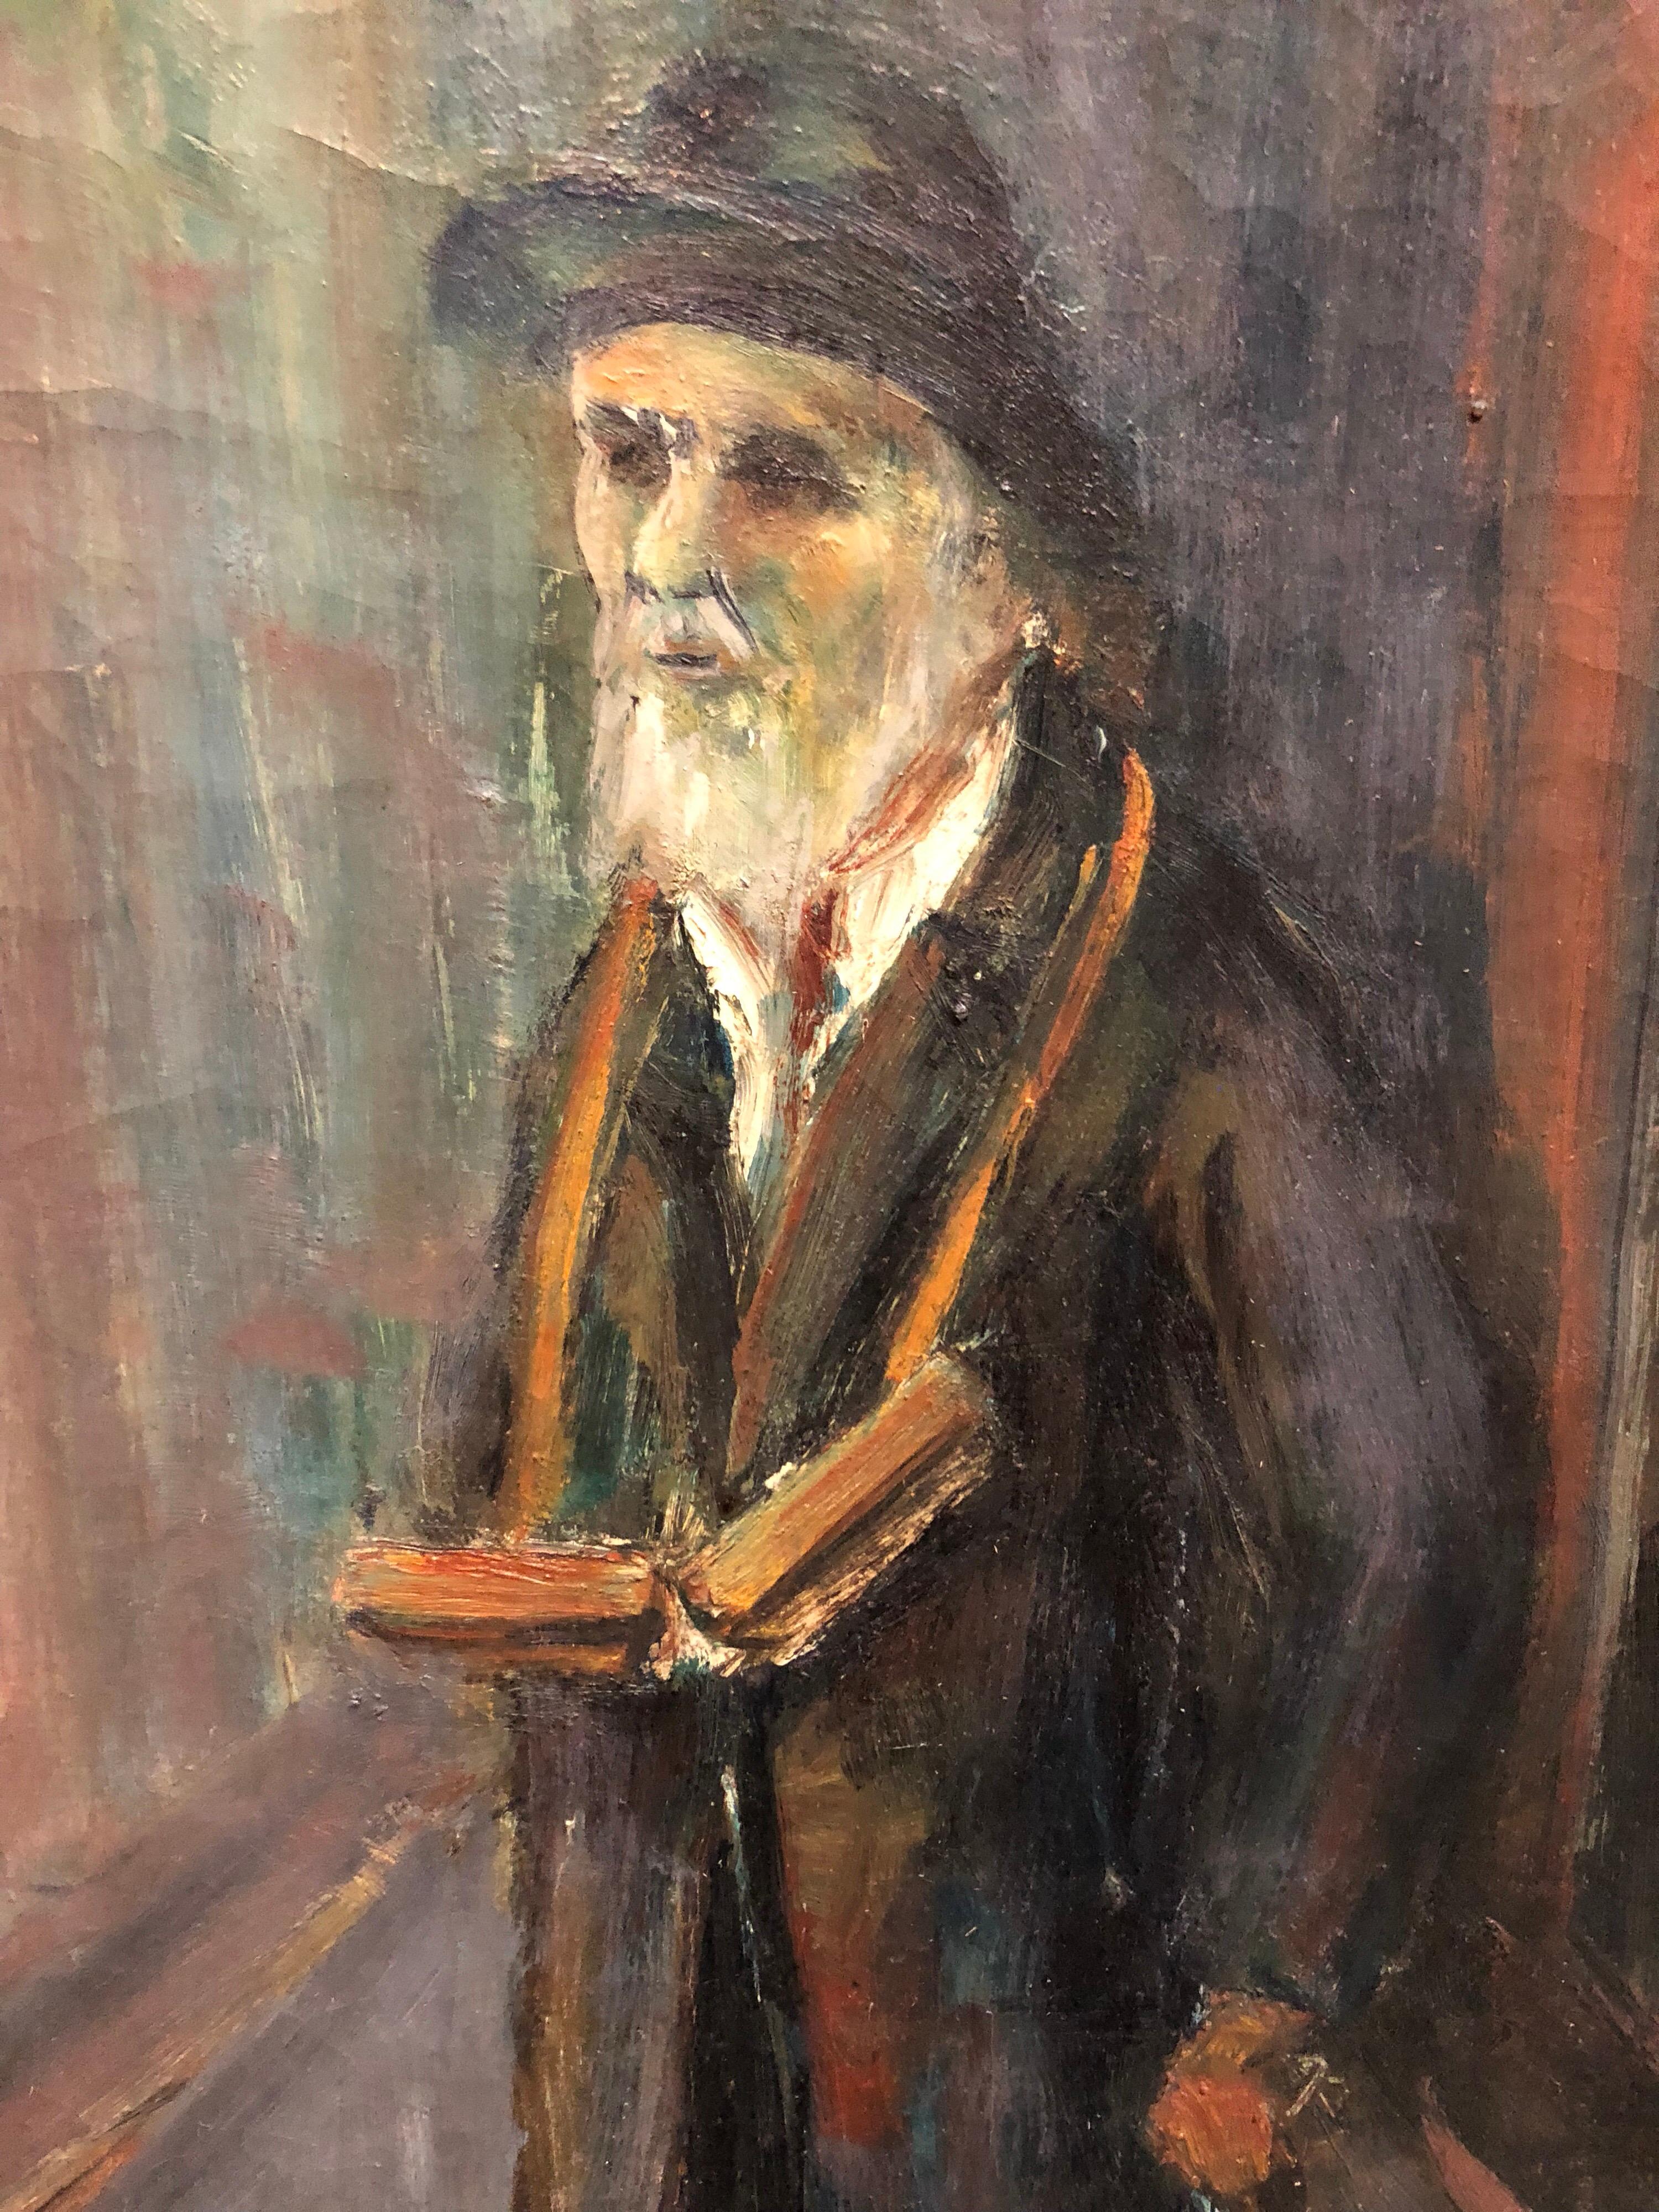 Ozer Shabat 1978-1901

Ozer Shabbat was an Israeli painter, a resident of Haifa. Belonged to the Palestine Expressionist group of the late 1920s and early 1930s.
Shabbat was born in Wolbrom, Poland. At the end of the First World War he went to